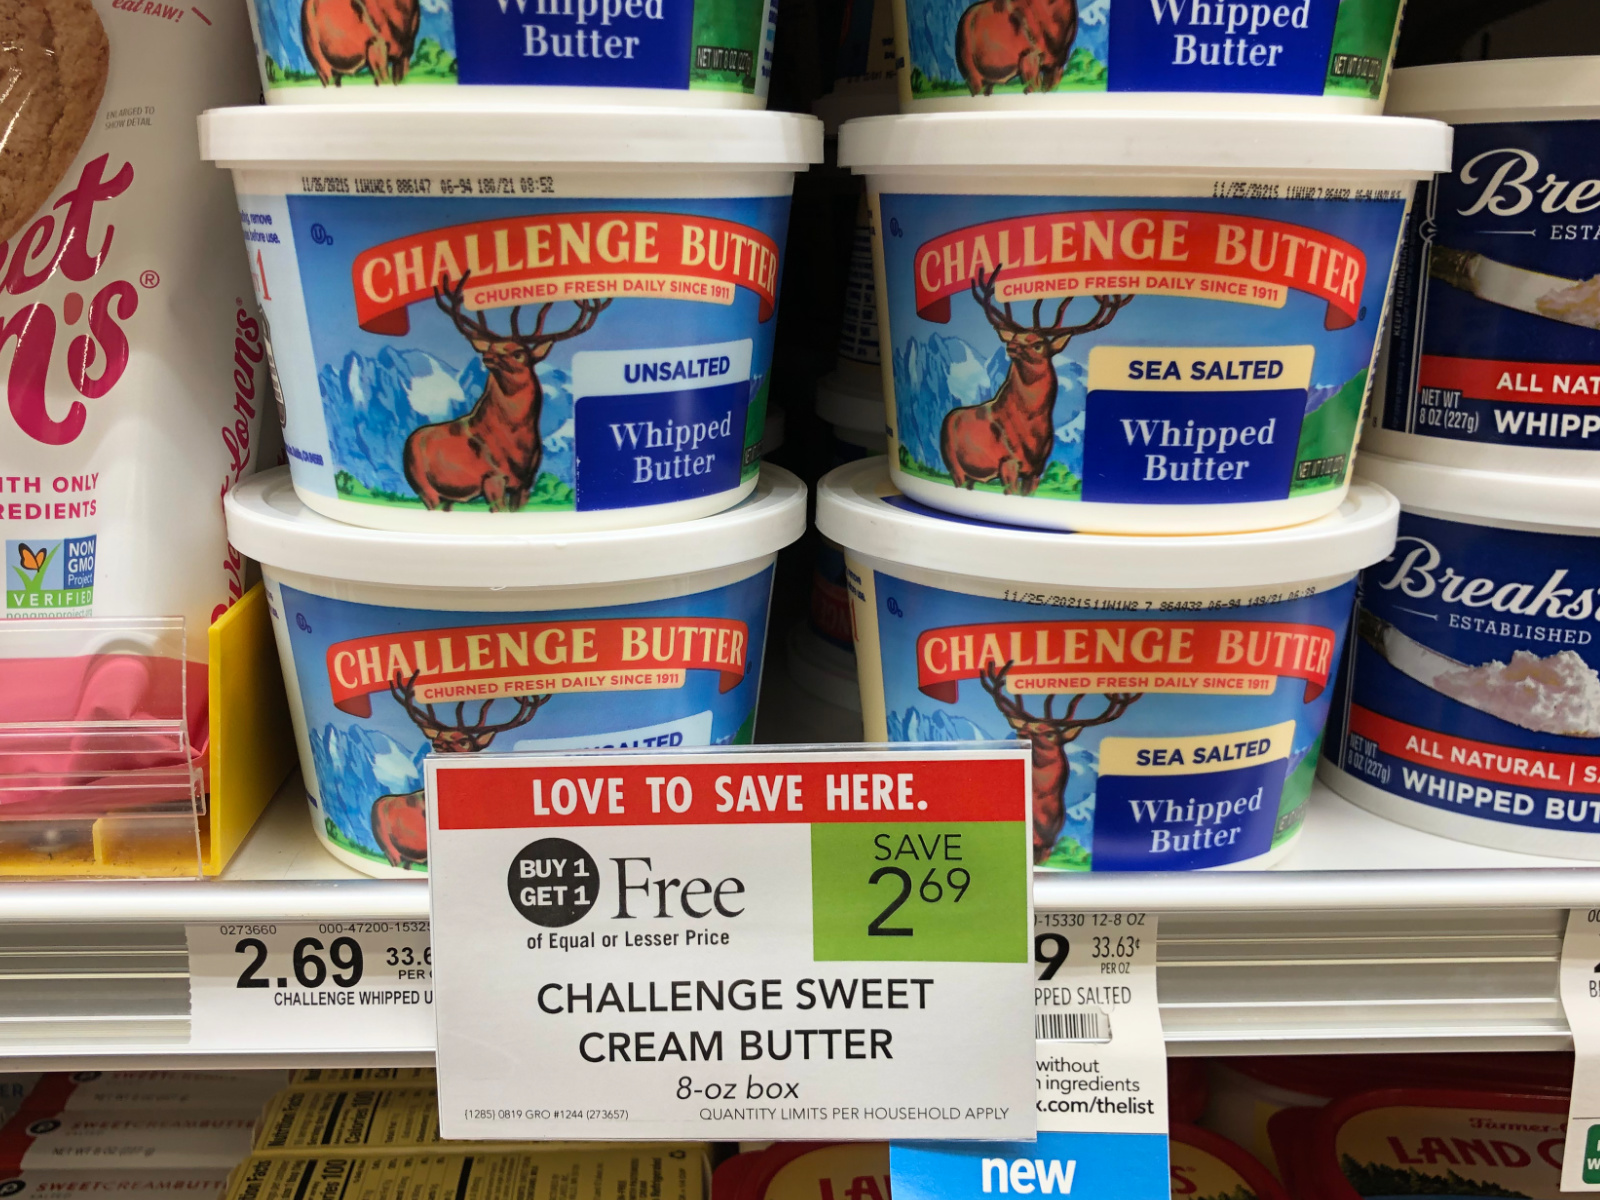 Pick Up A Great Deal On Challenge Butter This Week At Publix - New Whipped Butter Is As Low As 10¢! on I Heart Publix 1